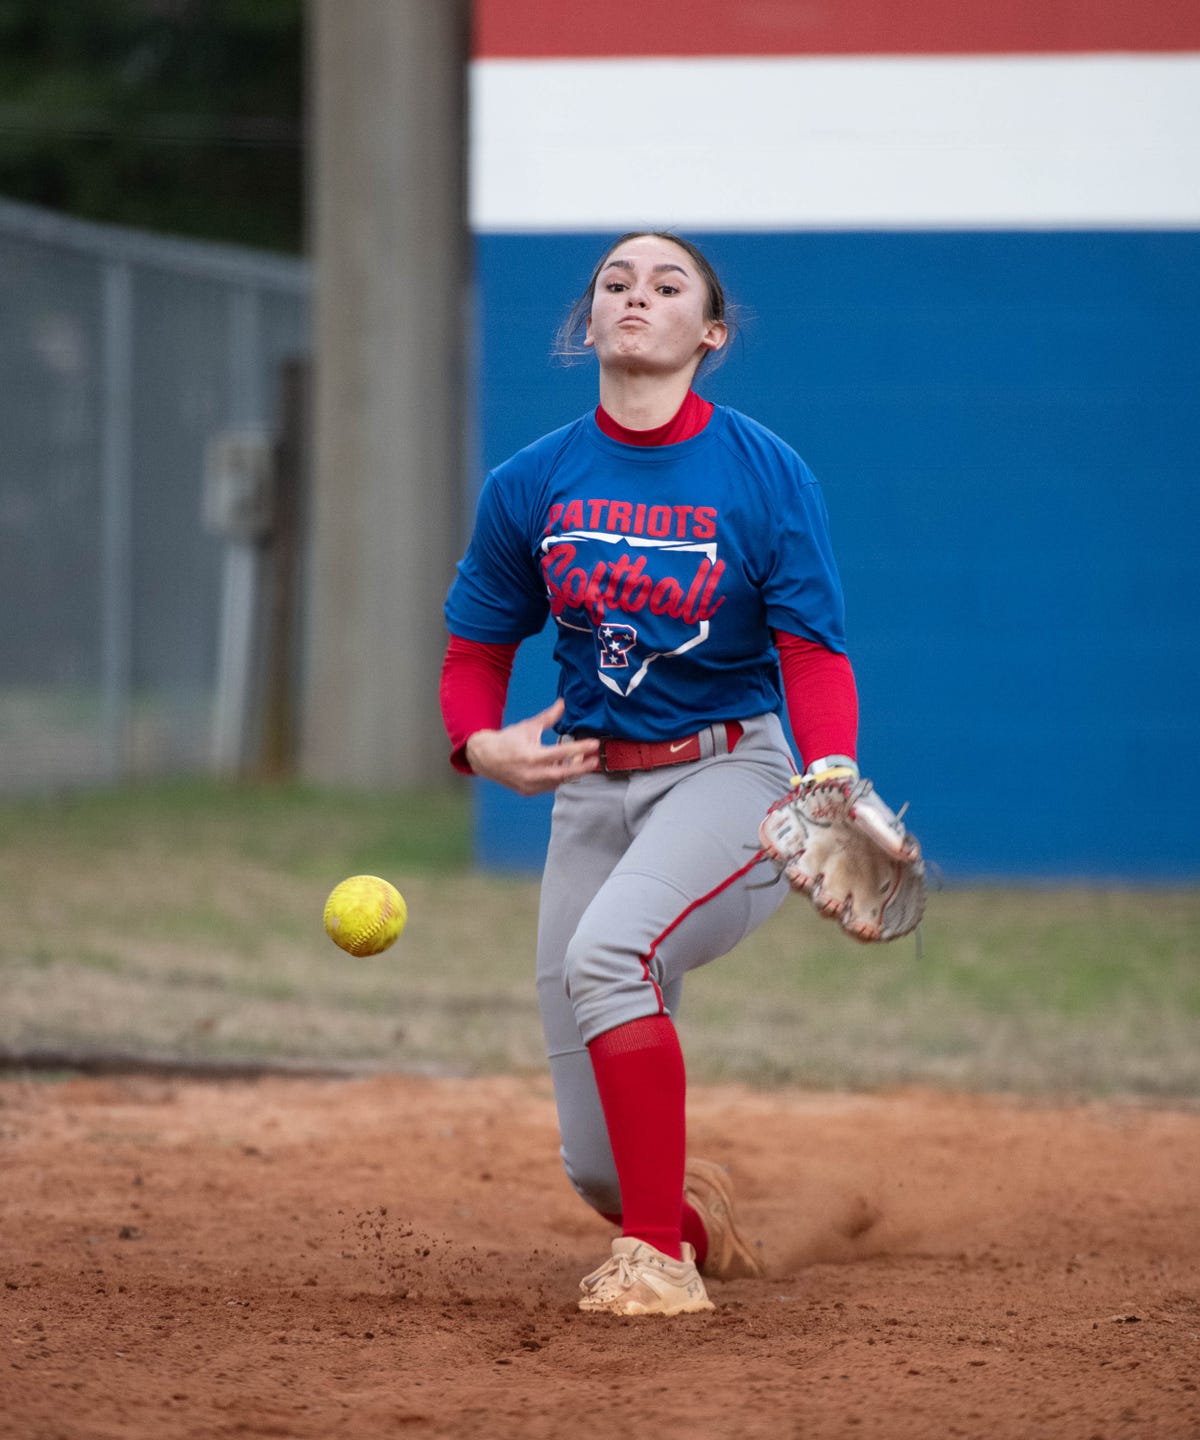 Pace Softball’s Dominant Pitching Duo Leads to Run-Rule Victory | Game Recap